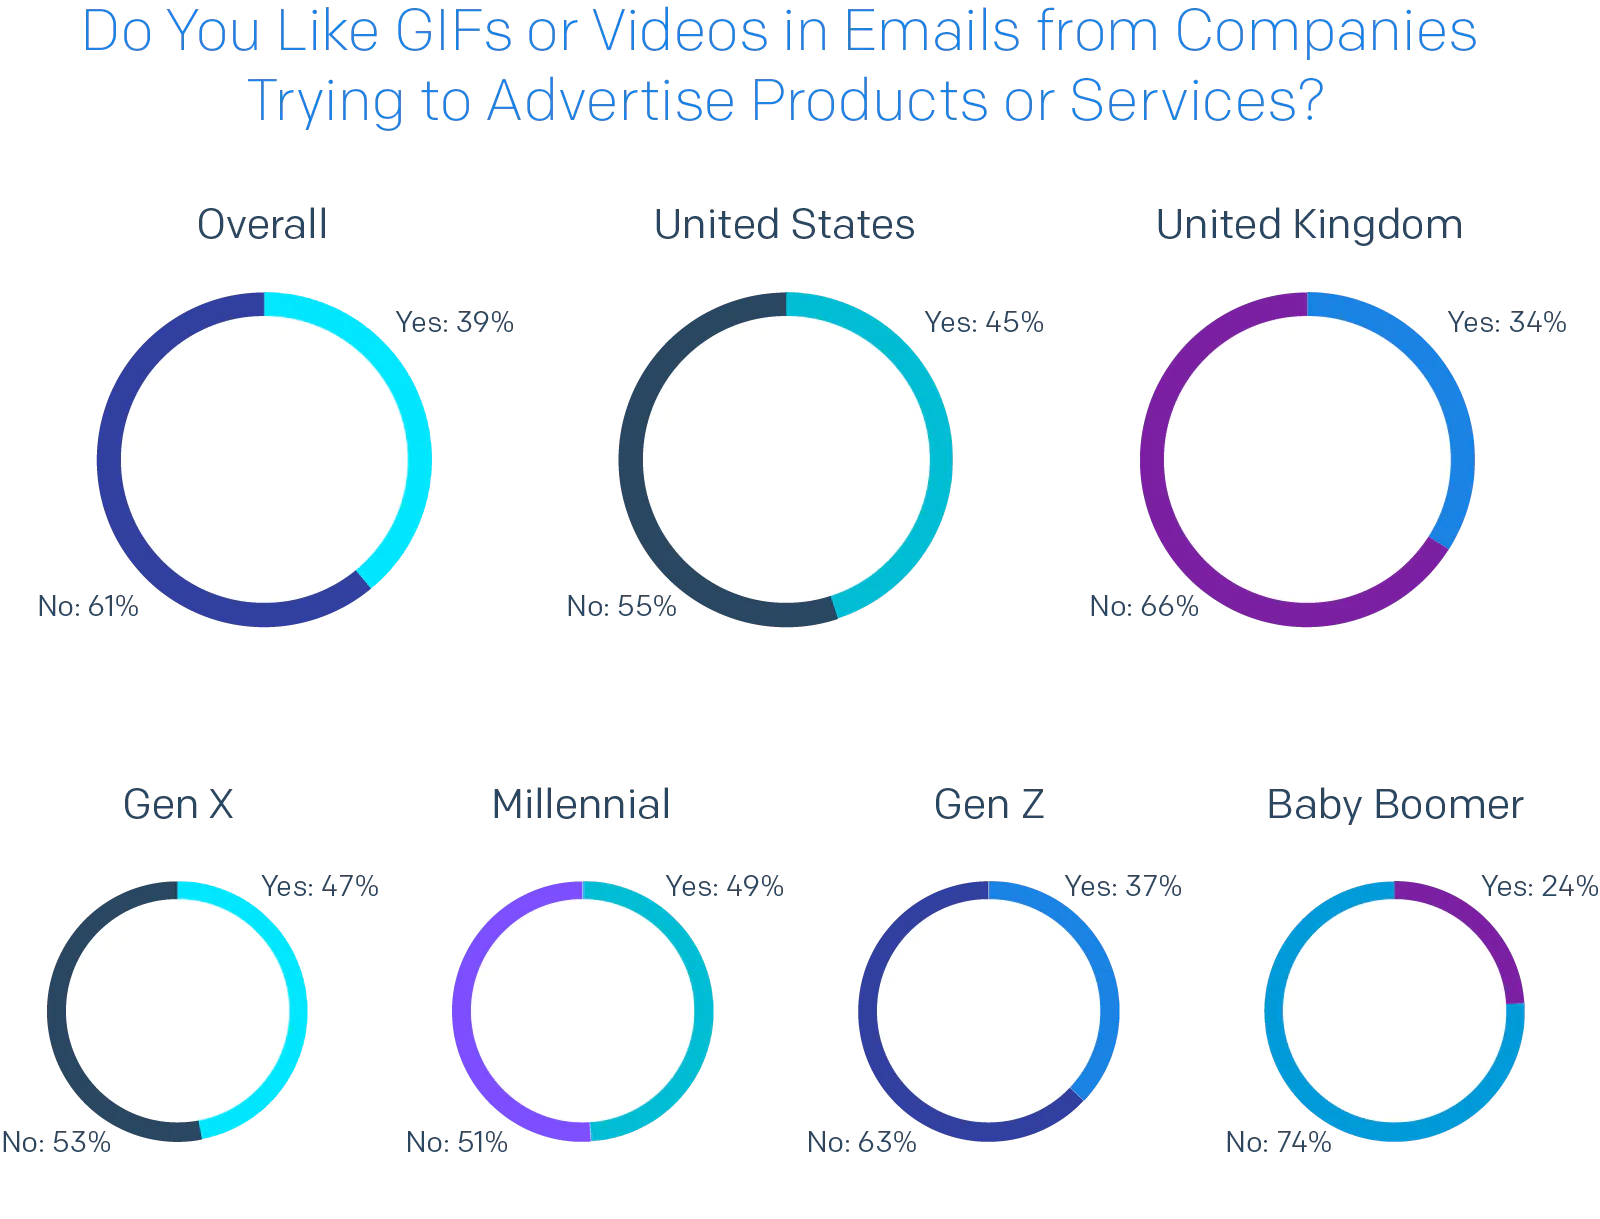 Pie charts of Do You Like GIFs or Videos in Emails from Companies Trying to Advertise Products or Services?